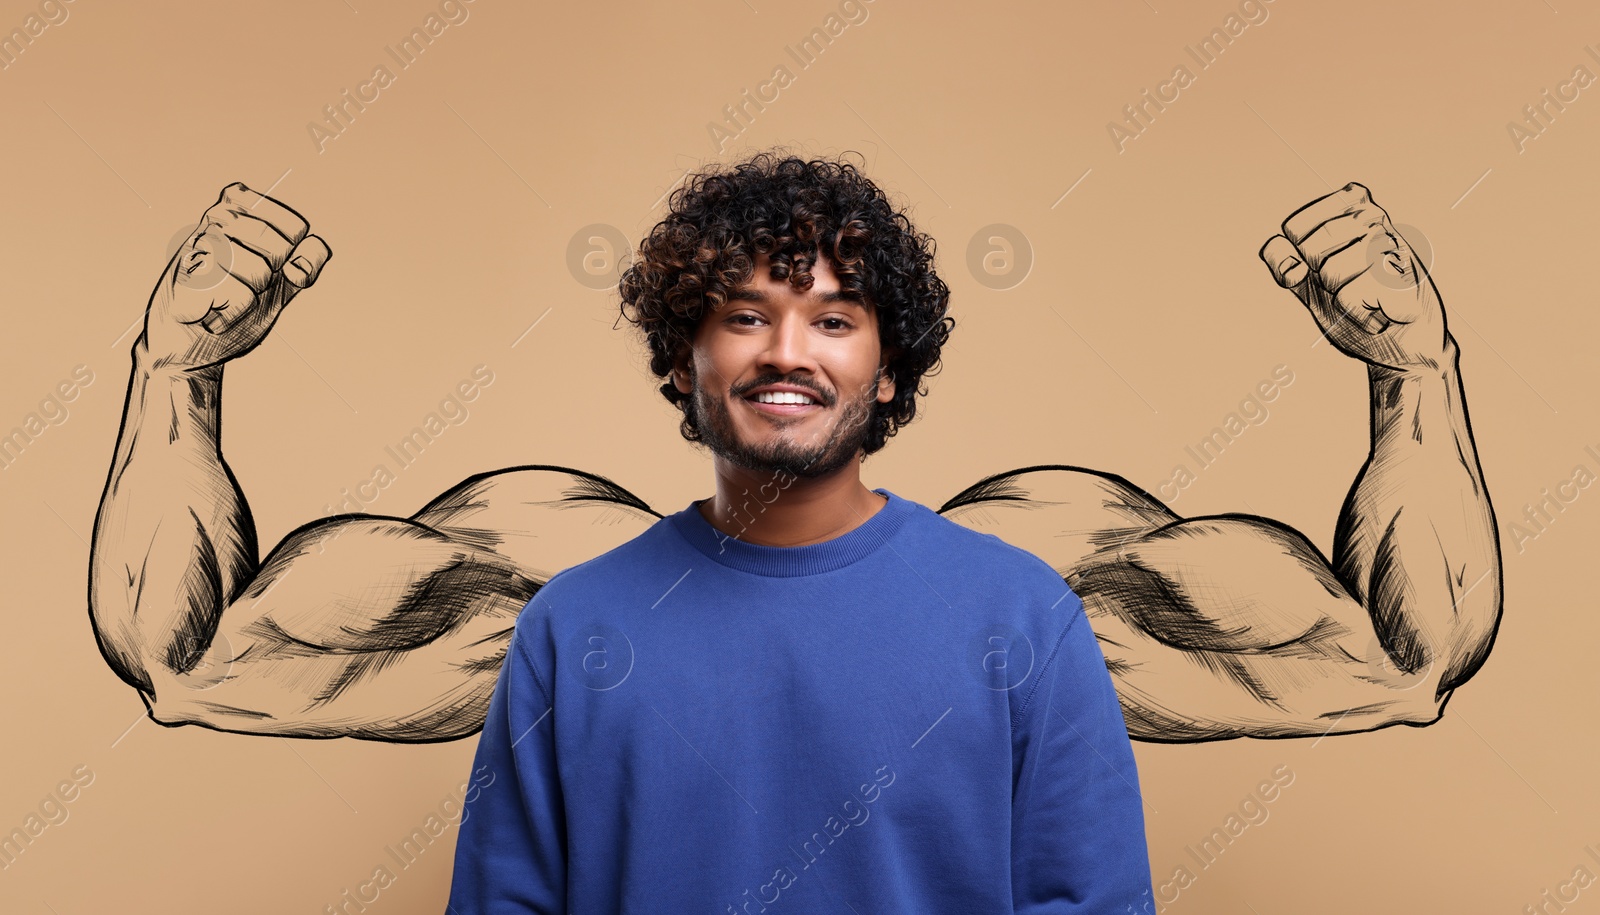 Image of Happy man and illustration of muscular arms behind him on beige background, banner design